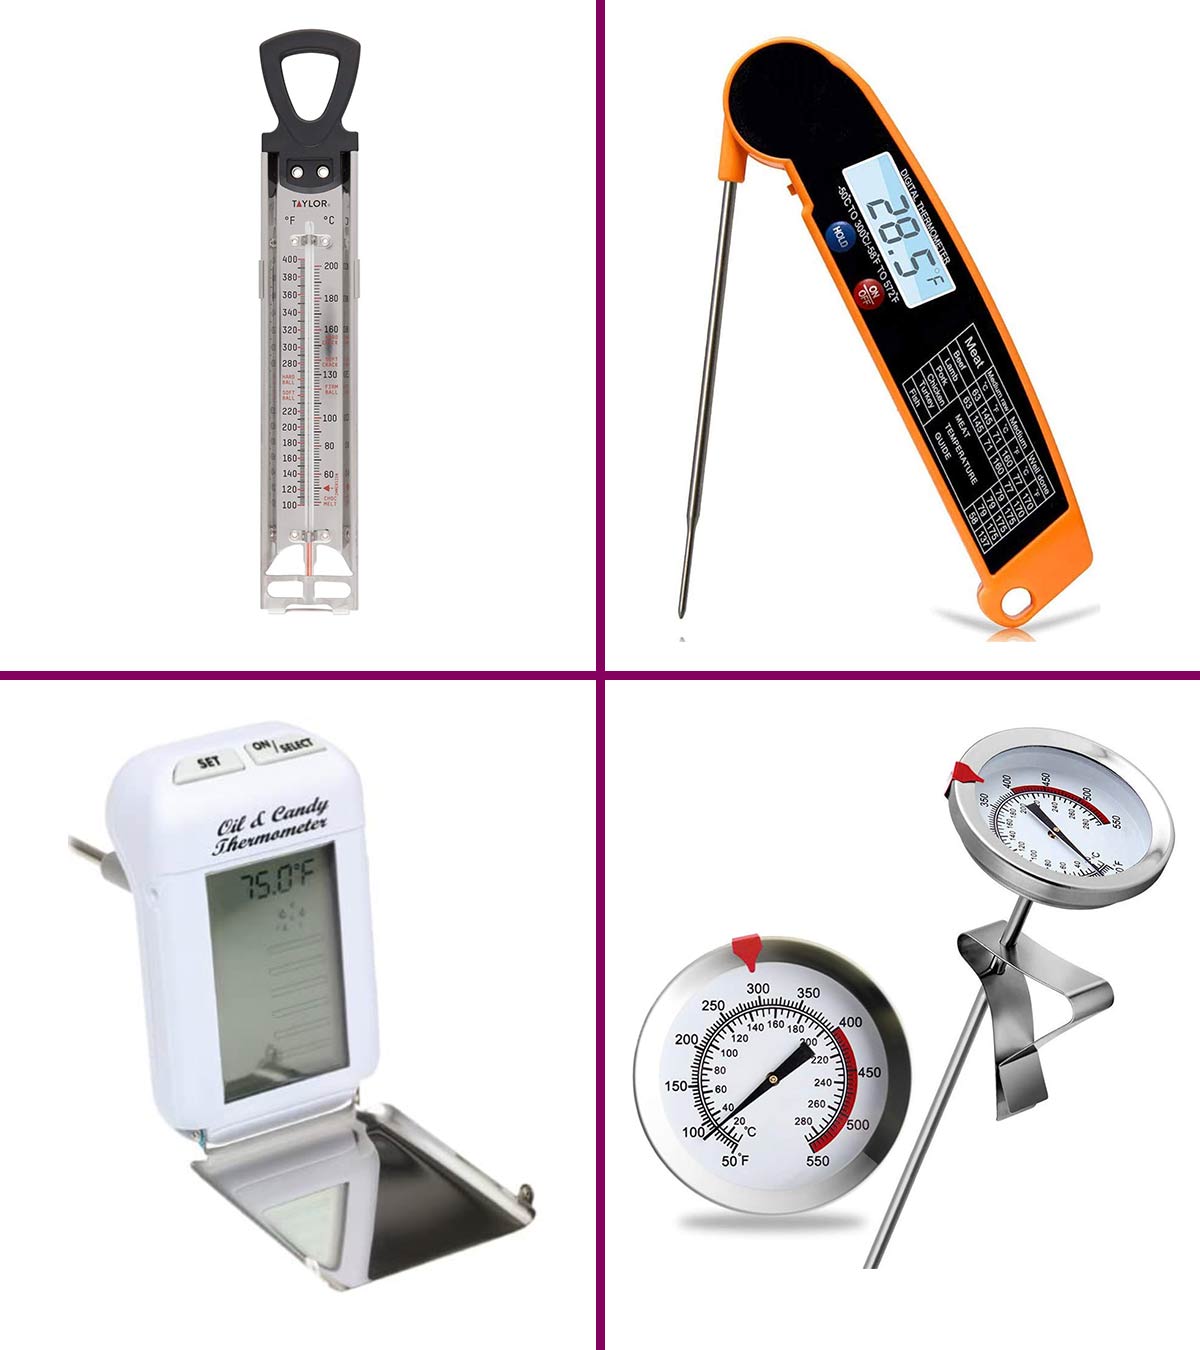 https://www.momjunction.com/wp-content/uploads/2020/10/The-15-Best-Candy-Thermometers-To-Buy-In-2020.jpg